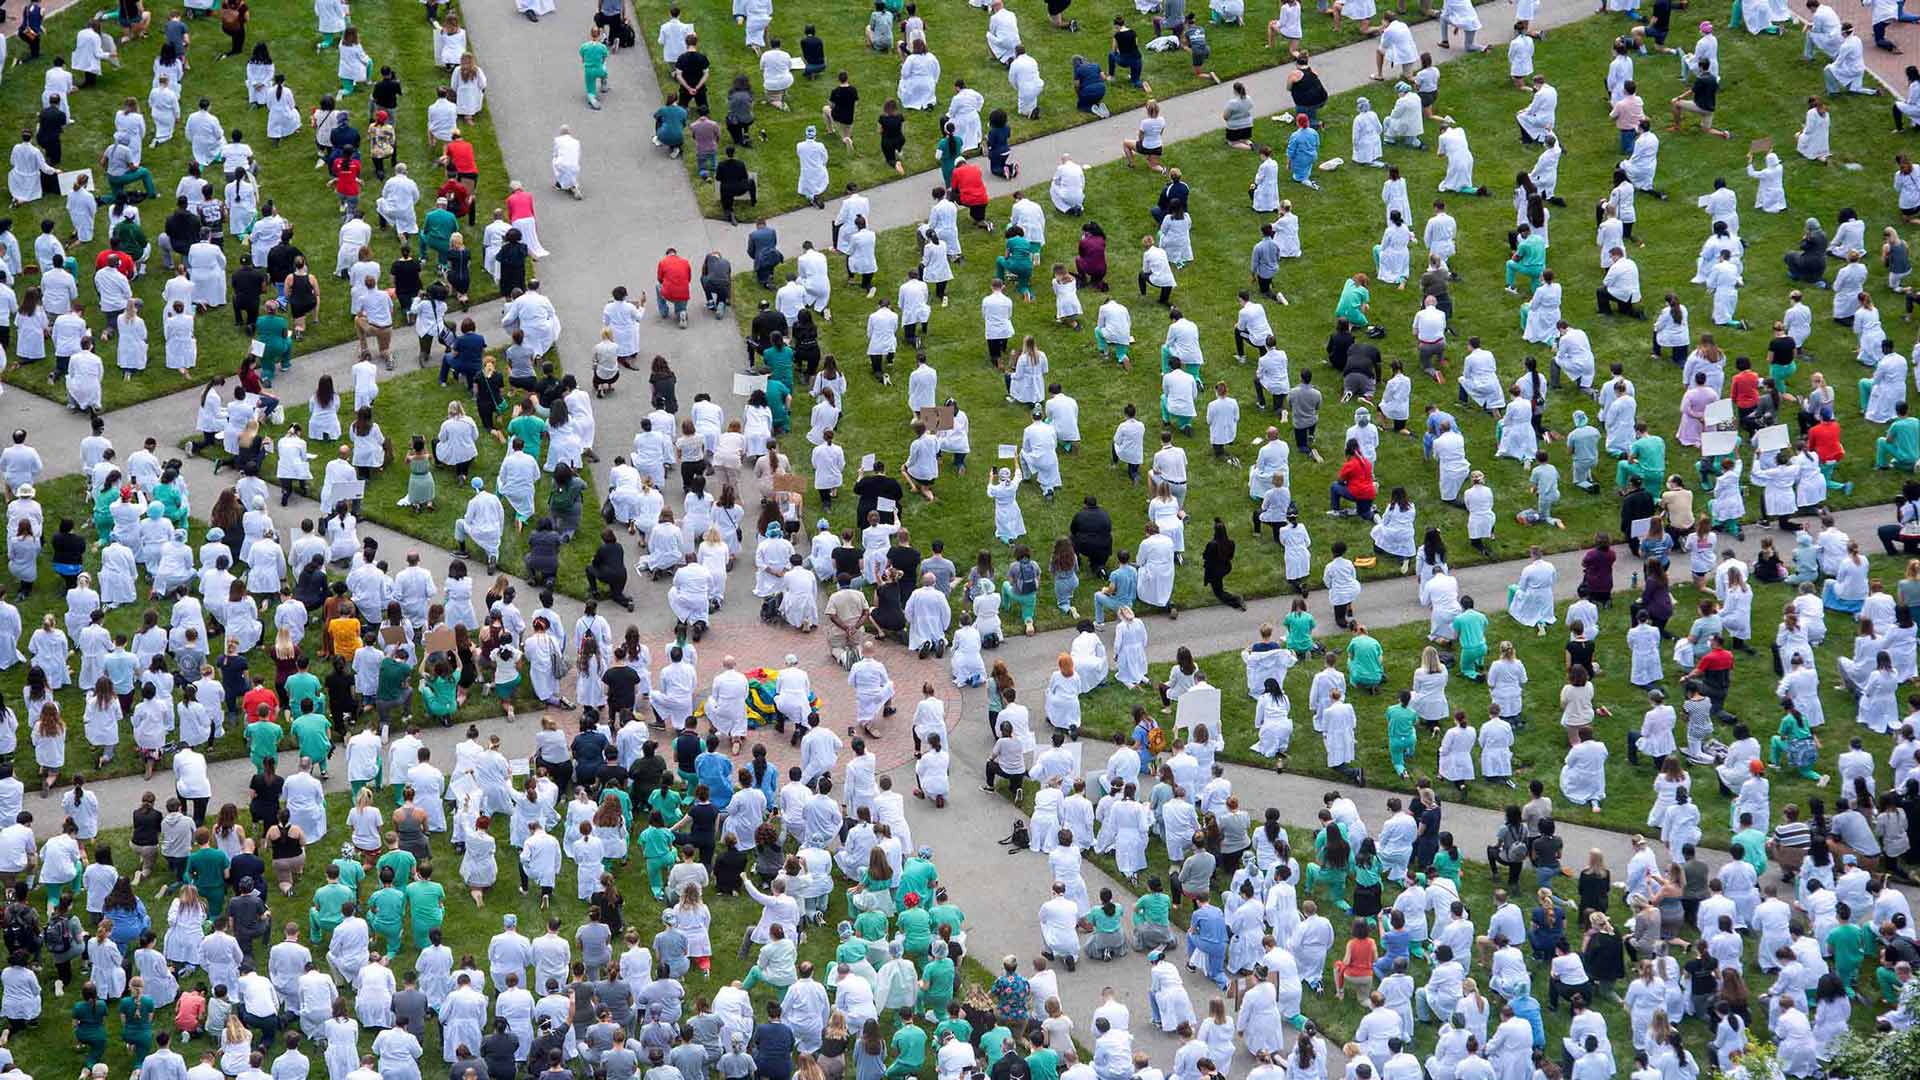 Top view of the lawn with people in white coats kneeling